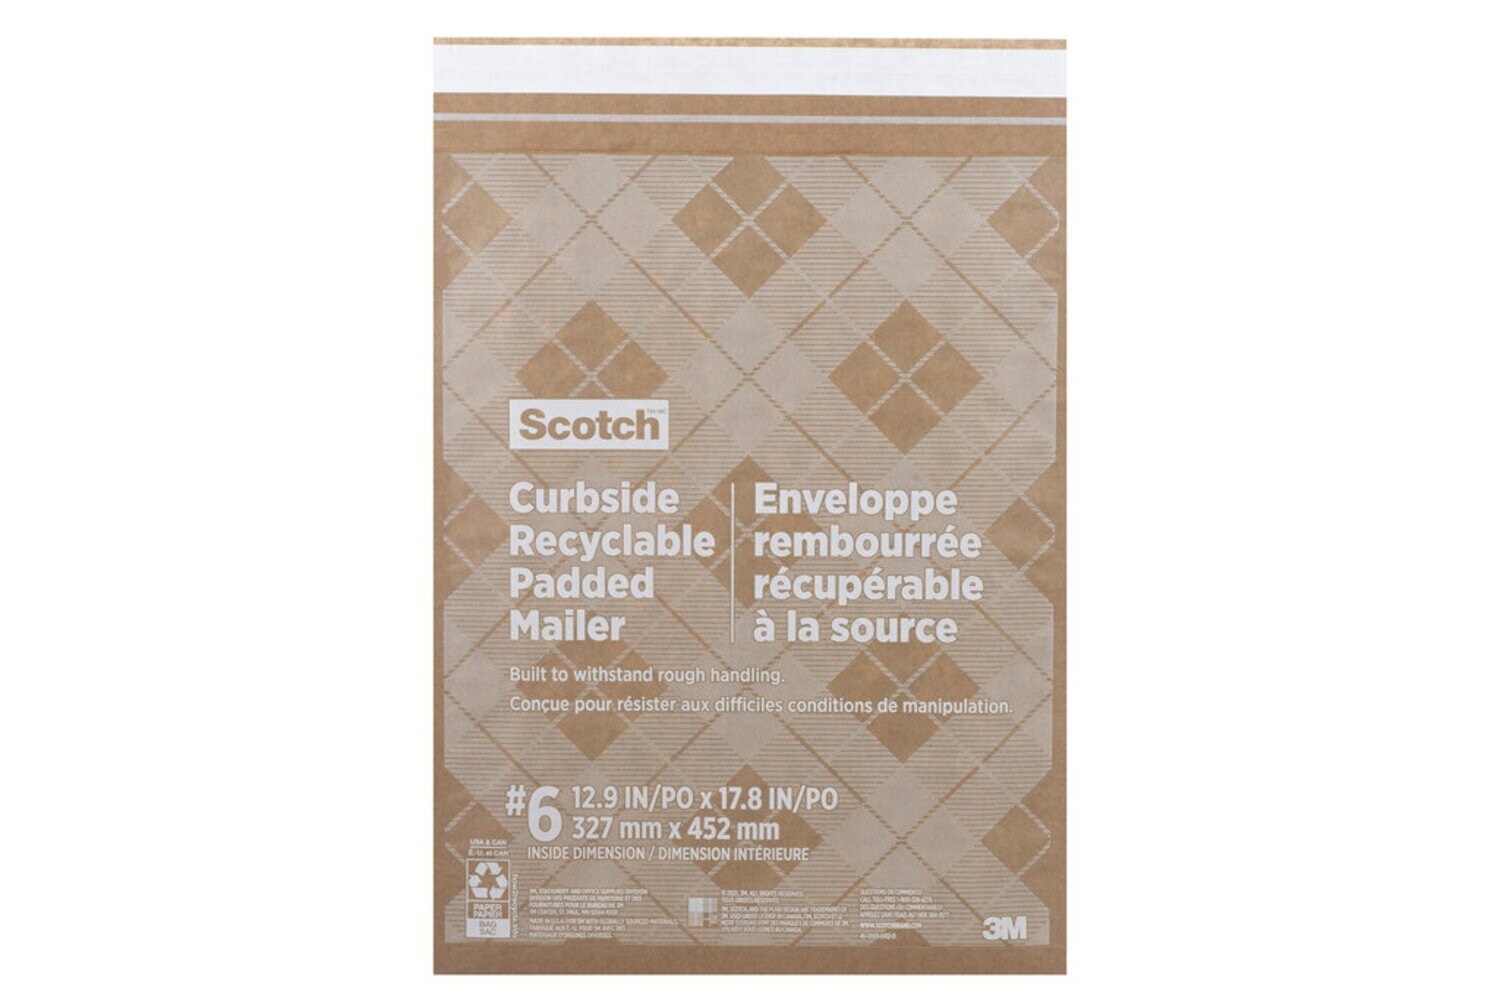 7100258007 - Scotch Curbside Recyclable Padded Mailer CR-6-1, 12.5 in x 17.5 in (317 mm x 444 mm), Size 6